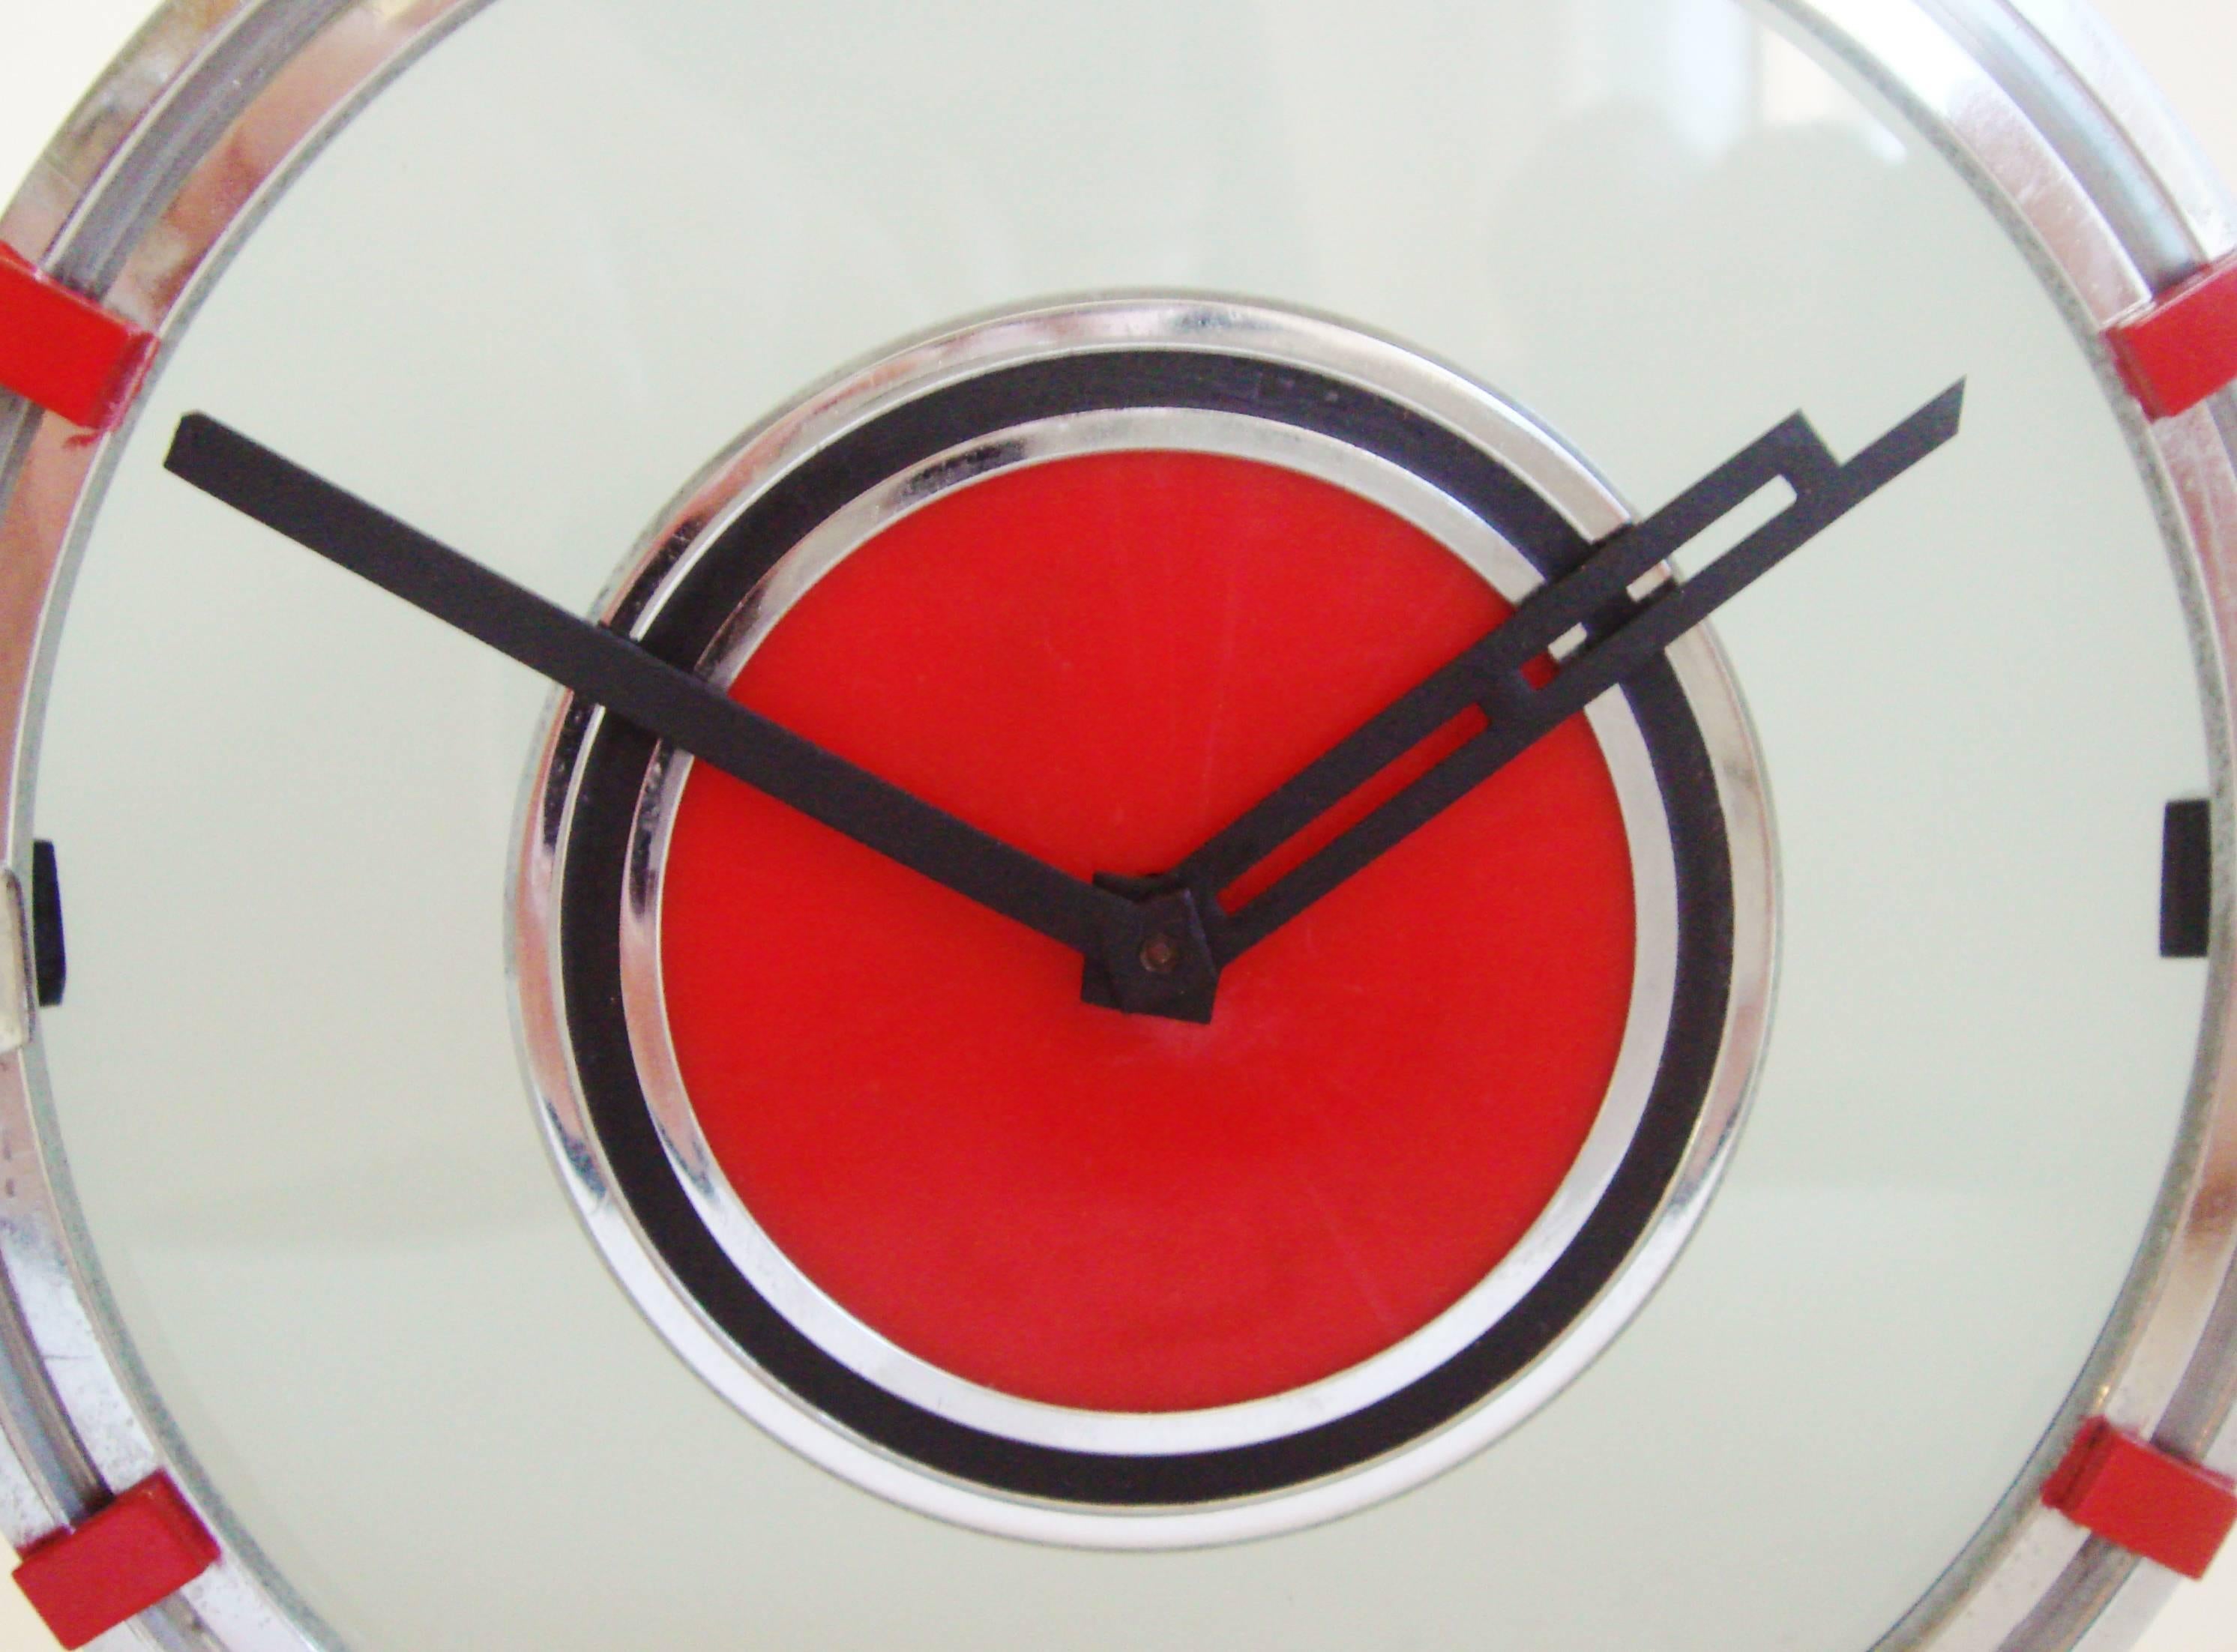 This stunningly designed, museum quality, Swiss Art Deco chrome, black enamel and red Phenolic desk clock is by the Movado company. It features an overall cloud shaped profile with a tinted glass face and a chrome bezel accented with red enameled